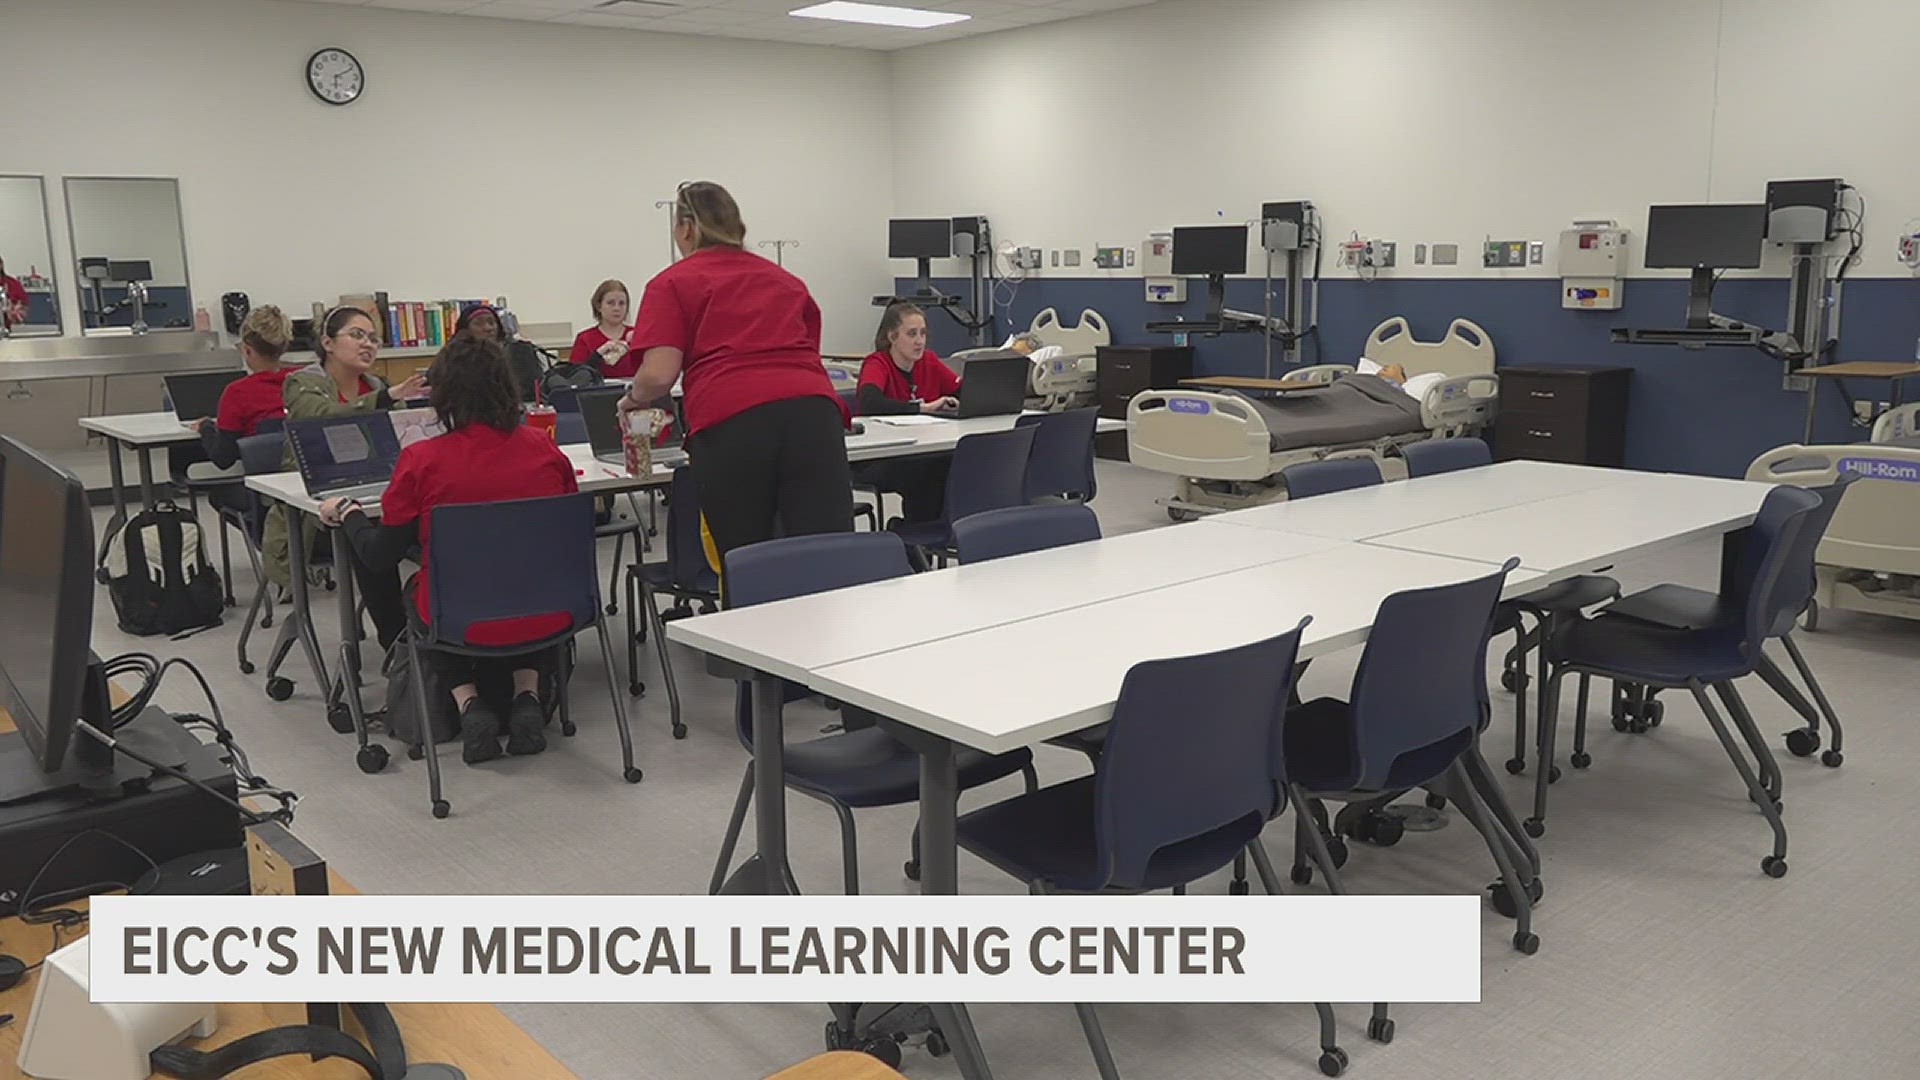 The Scott Community College renovation gives medical students expanded classrooms and simulation labs for hands-on learning.